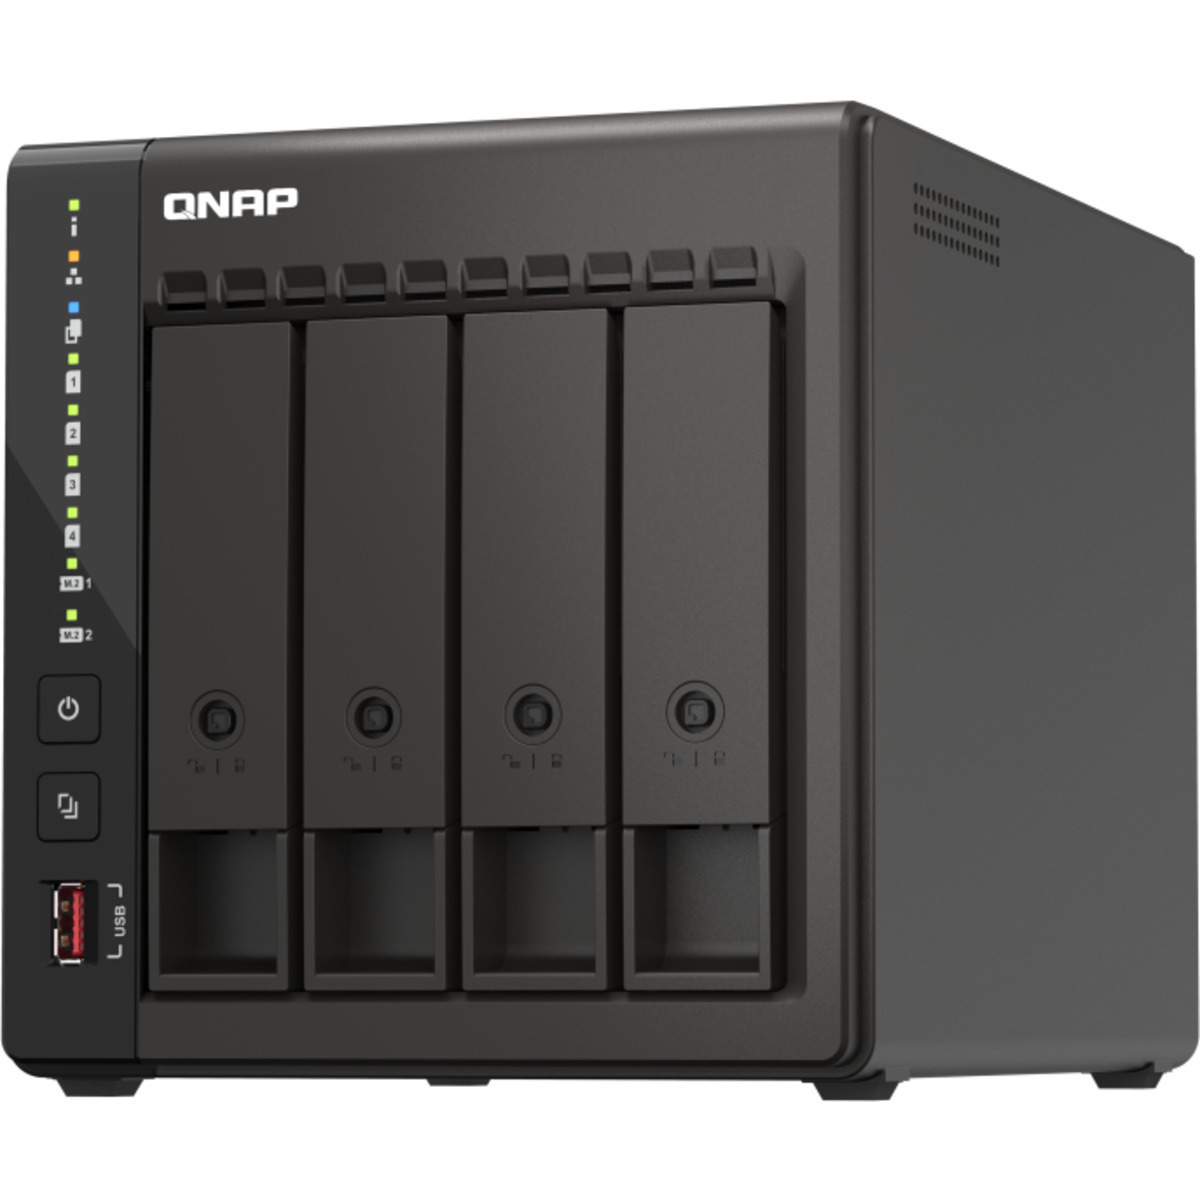 QNAP TS-453E 56tb 4-Bay Desktop Multimedia / Power User / Business NAS - Network Attached Storage Device 4x14tb Western Digital Ultrastar DC HC530 WUH721414ALE6L4 3.5 7200rpm SATA 6Gb/s HDD ENTERPRISE Class Drives Installed - Burn-In Tested TS-453E